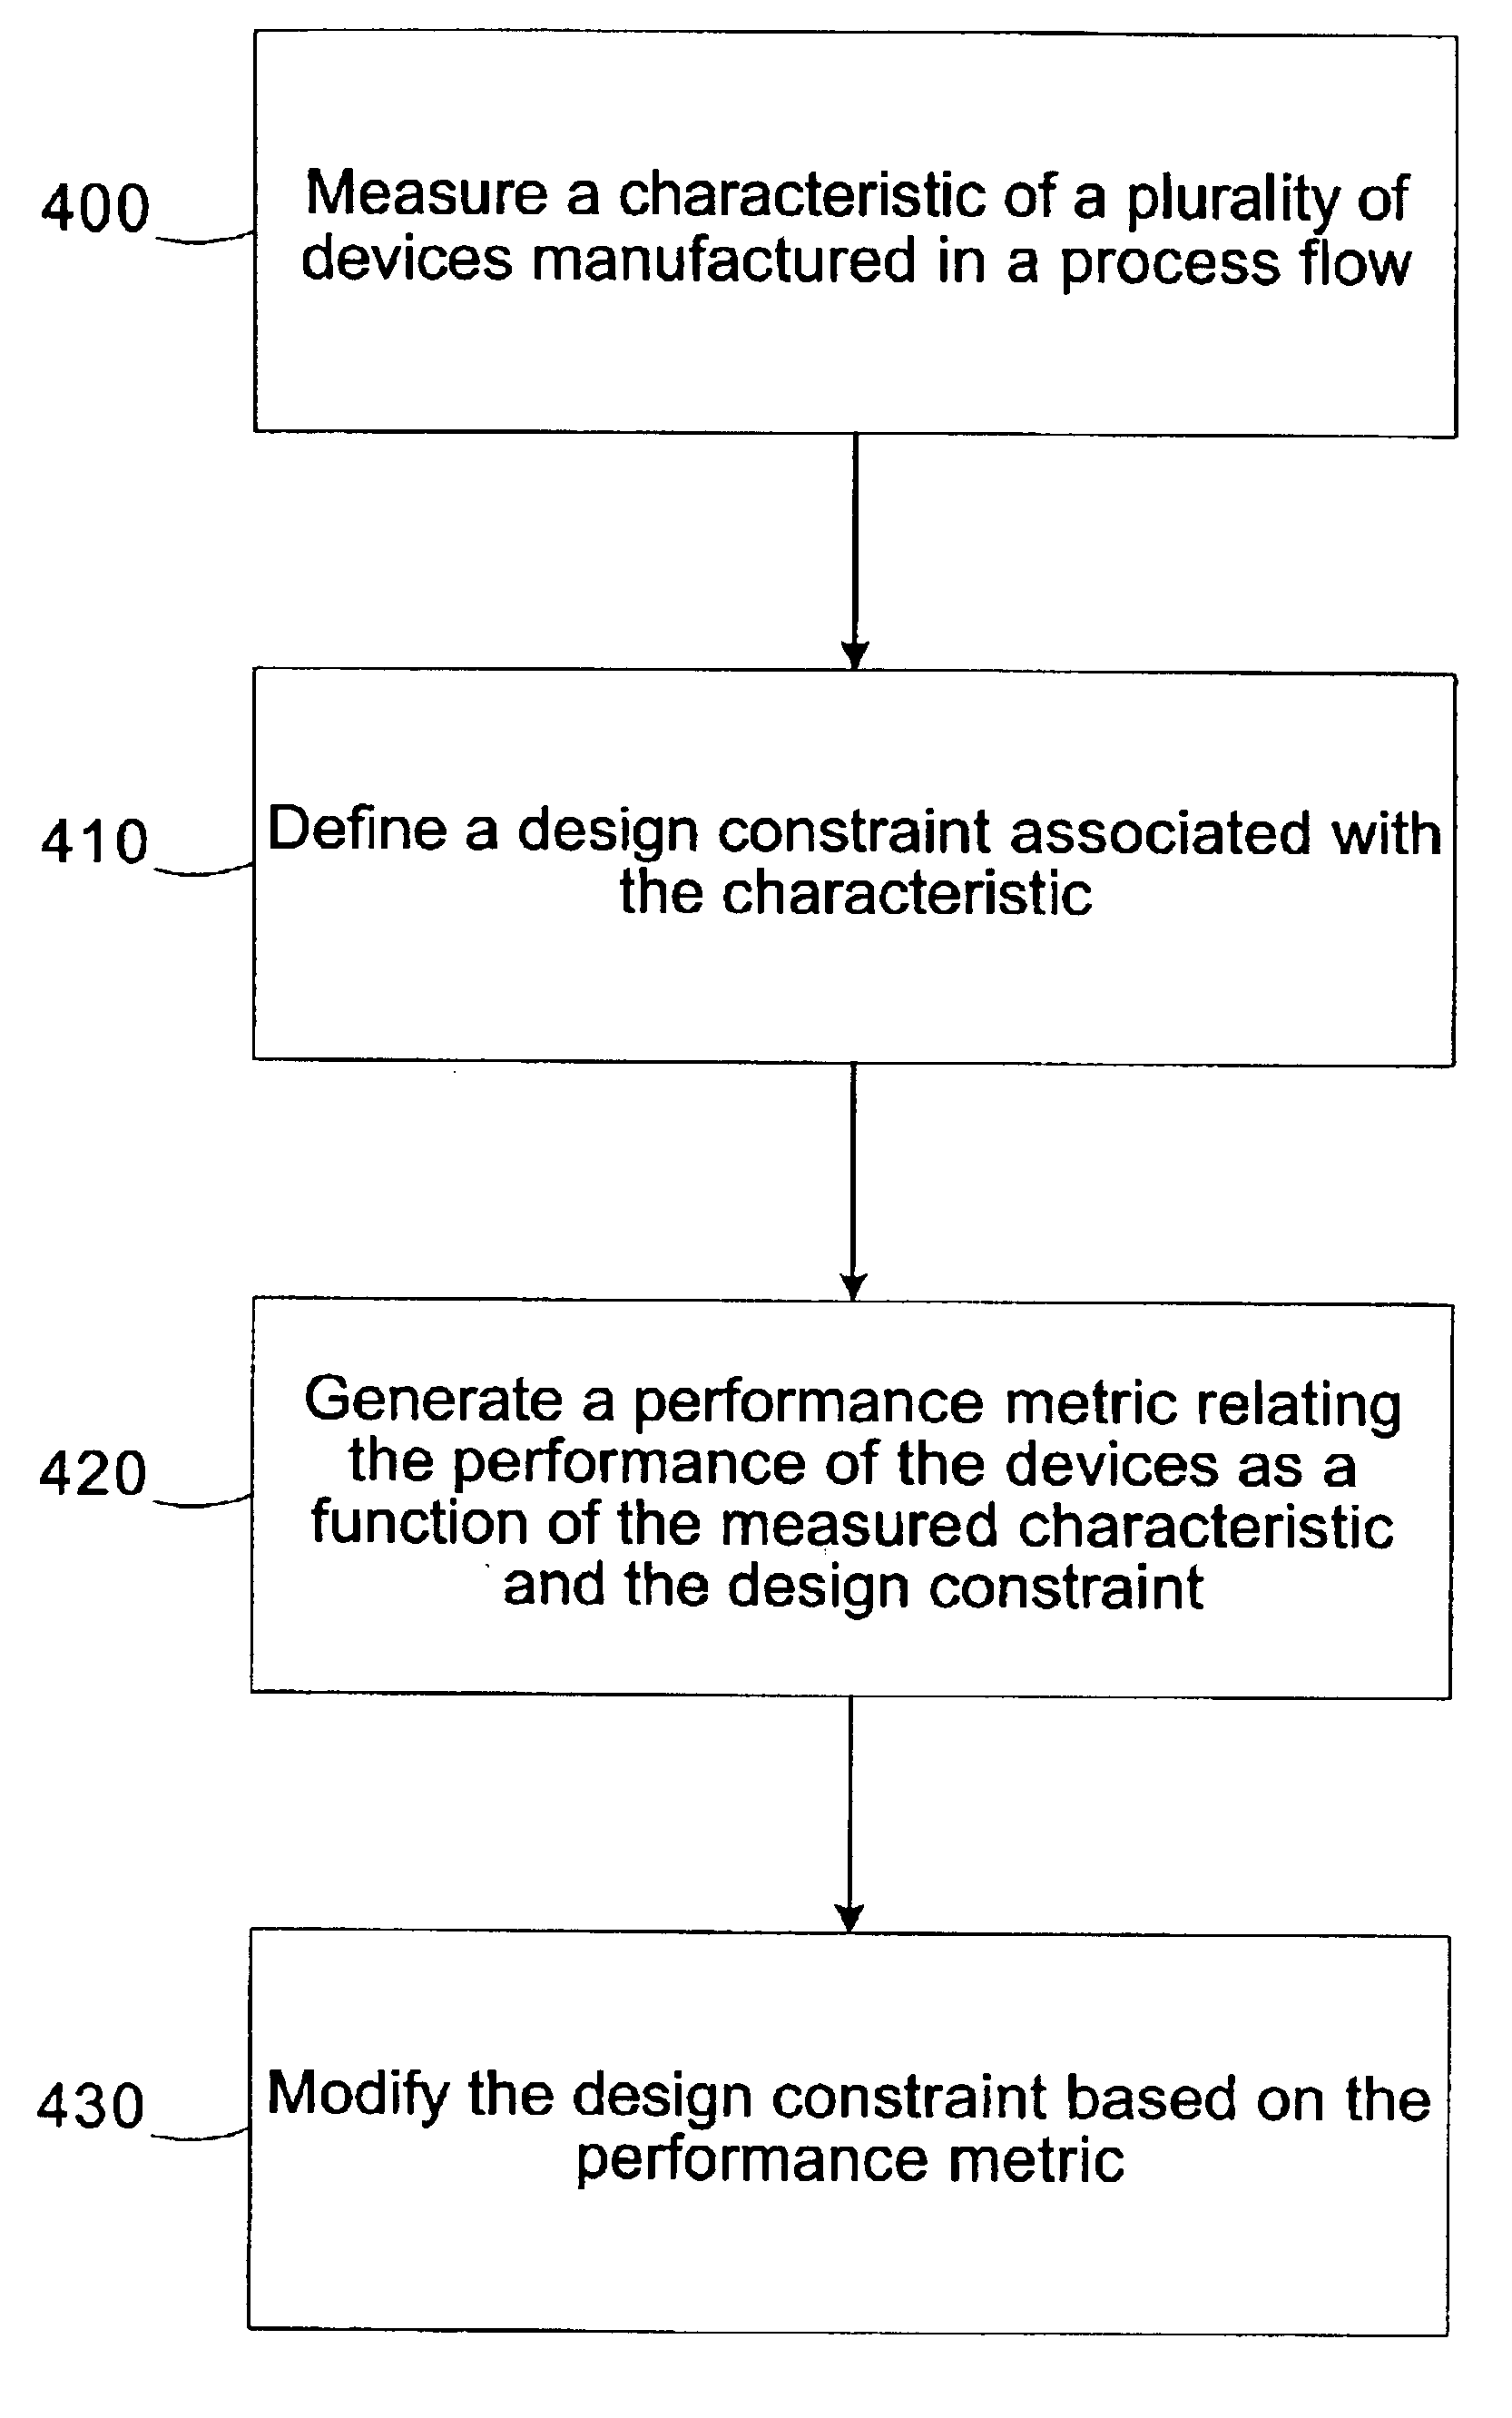 Method and apparatus for modifying design constraints based on observed performance